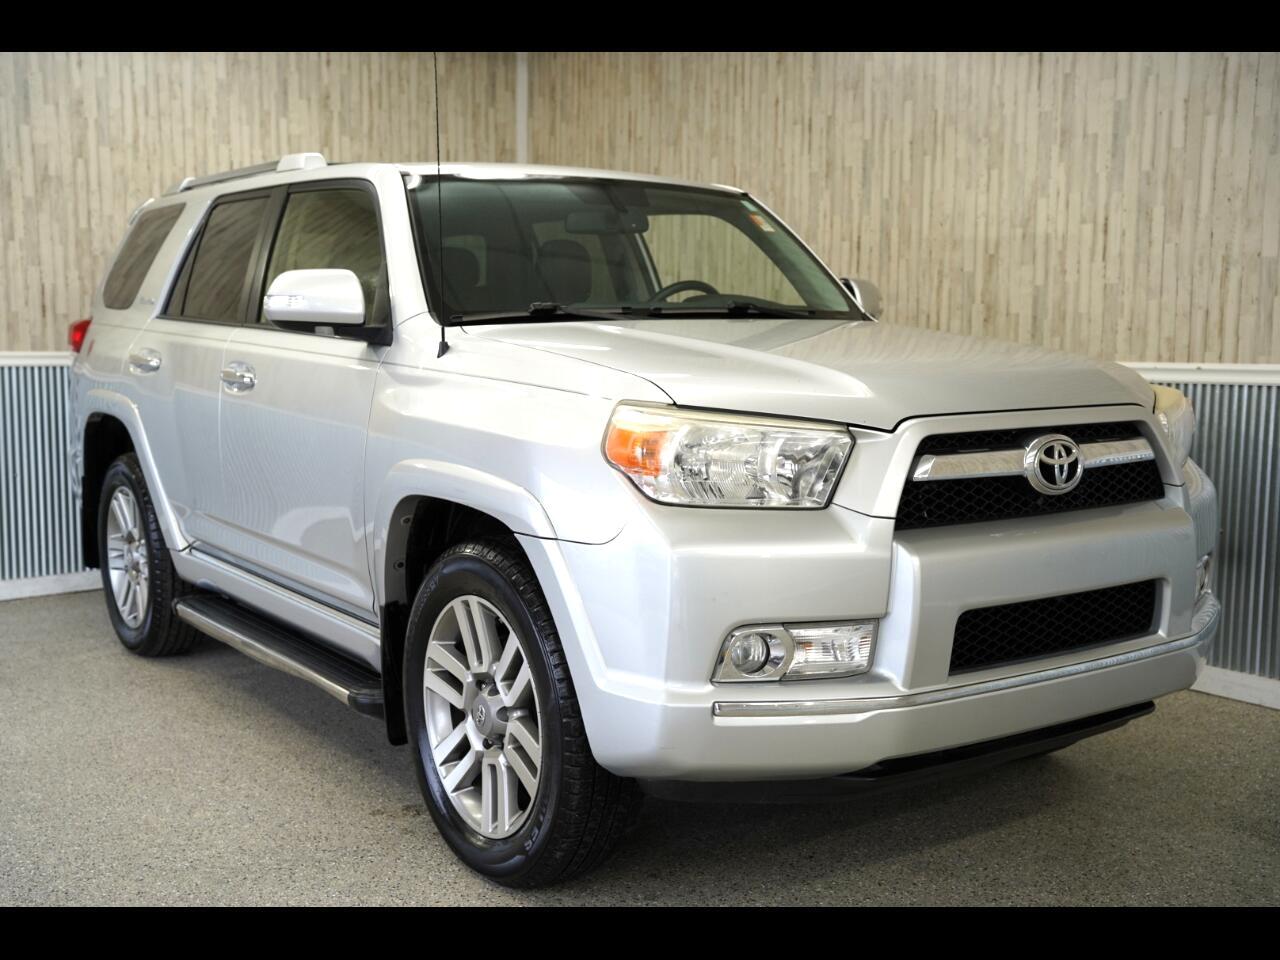 2013 Toyota 4Runner 4dr Limited V6 Auto 4WD (Natl)